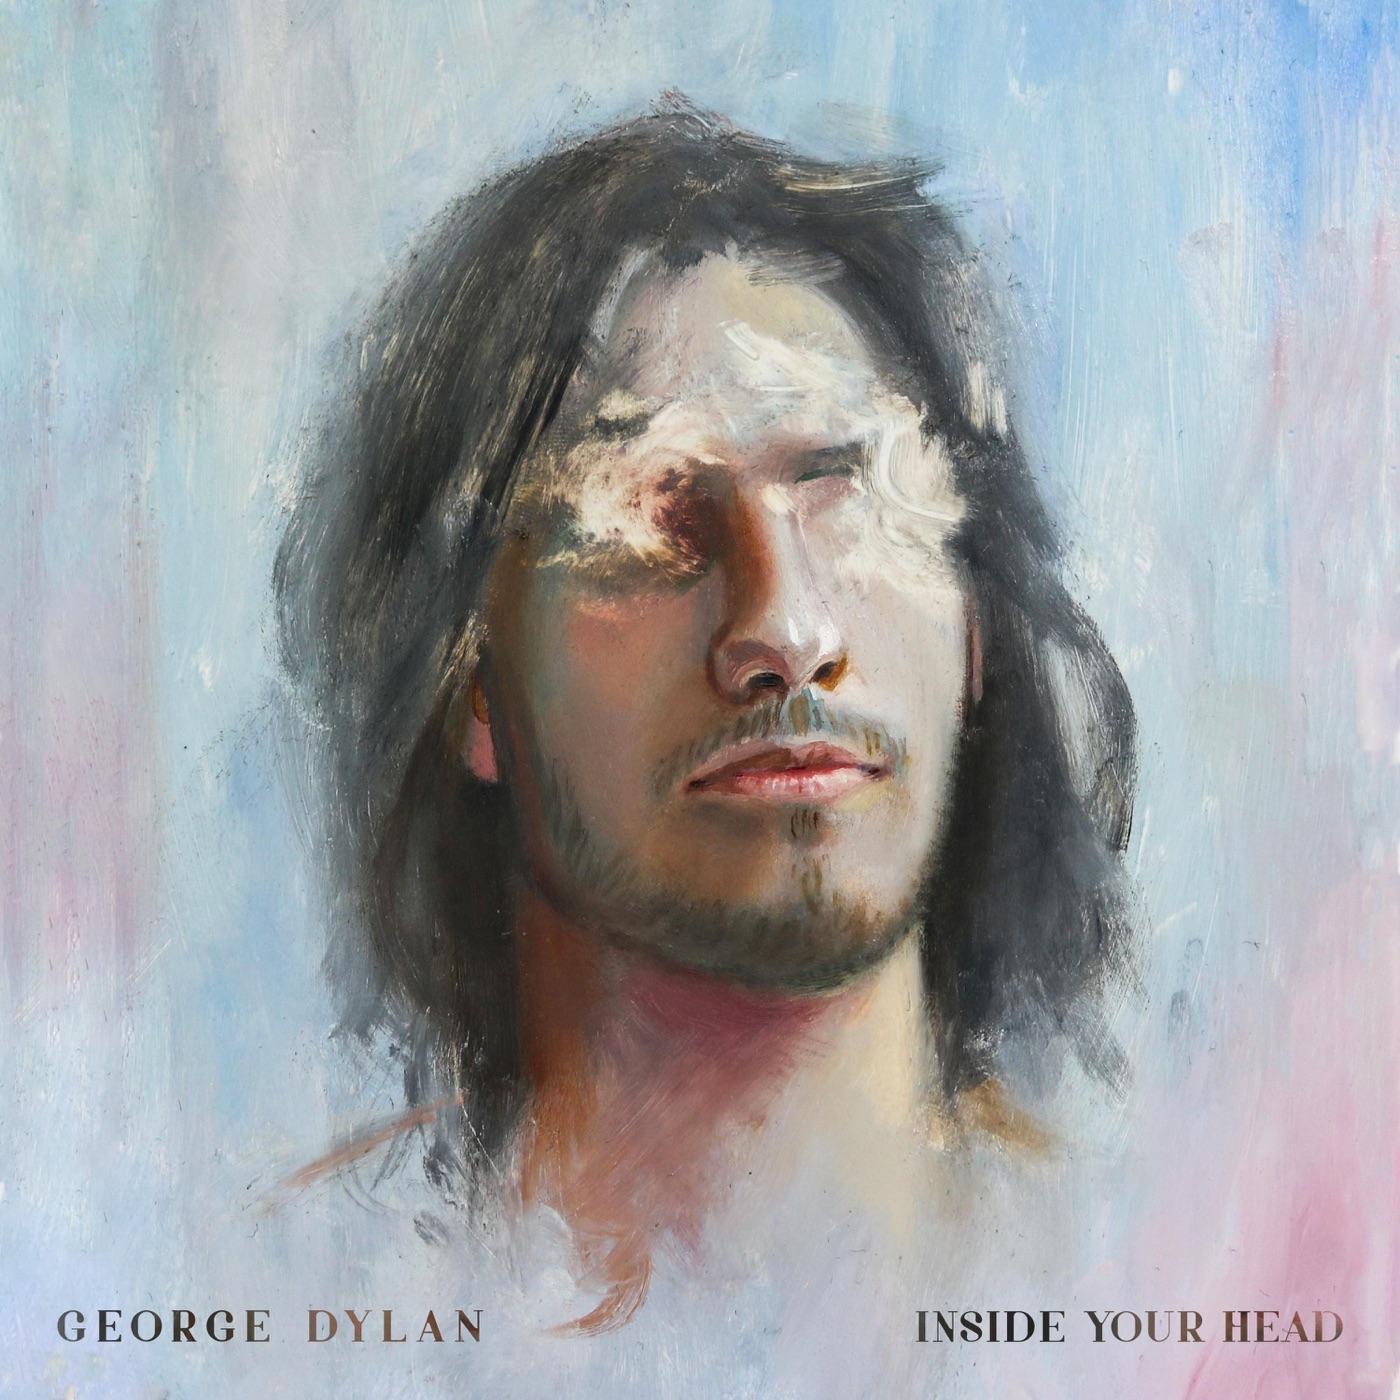 Inside Your Head by George Dylan